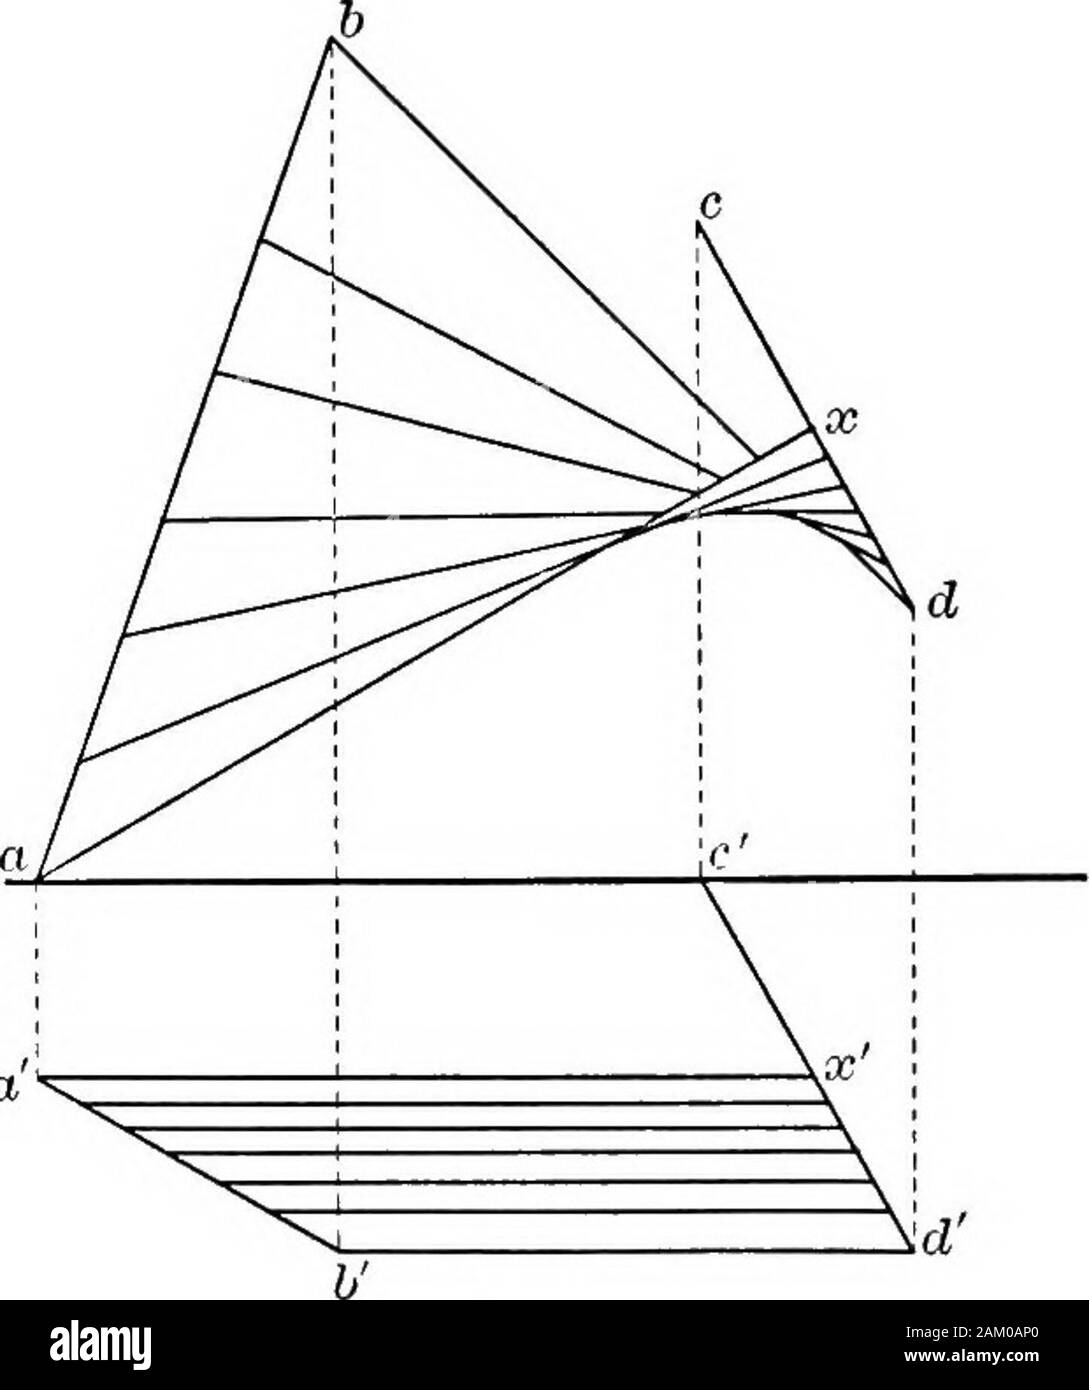 The essentials of descriptive geometry . Fig. 70. 88 ESSENTIALS OF DESCRIPTIVE GEOMETRY. Fig. 71. There are innumerable warped surfaces since there are innumerable combinationsof generatrices, directrices,and plane directors butcomparatively few of themare important commer-cially, and these will bediscussed in detail in alater chapter. 78. .A surface of revolu-tion is generated by themotion of a line aboutanother Hne called the axisof revolution. The gen-erating line may be eitherstraight or curved; in casethe generatrix is a straight Une the resulting surface will be a ruled surface of revolu Stock Photo